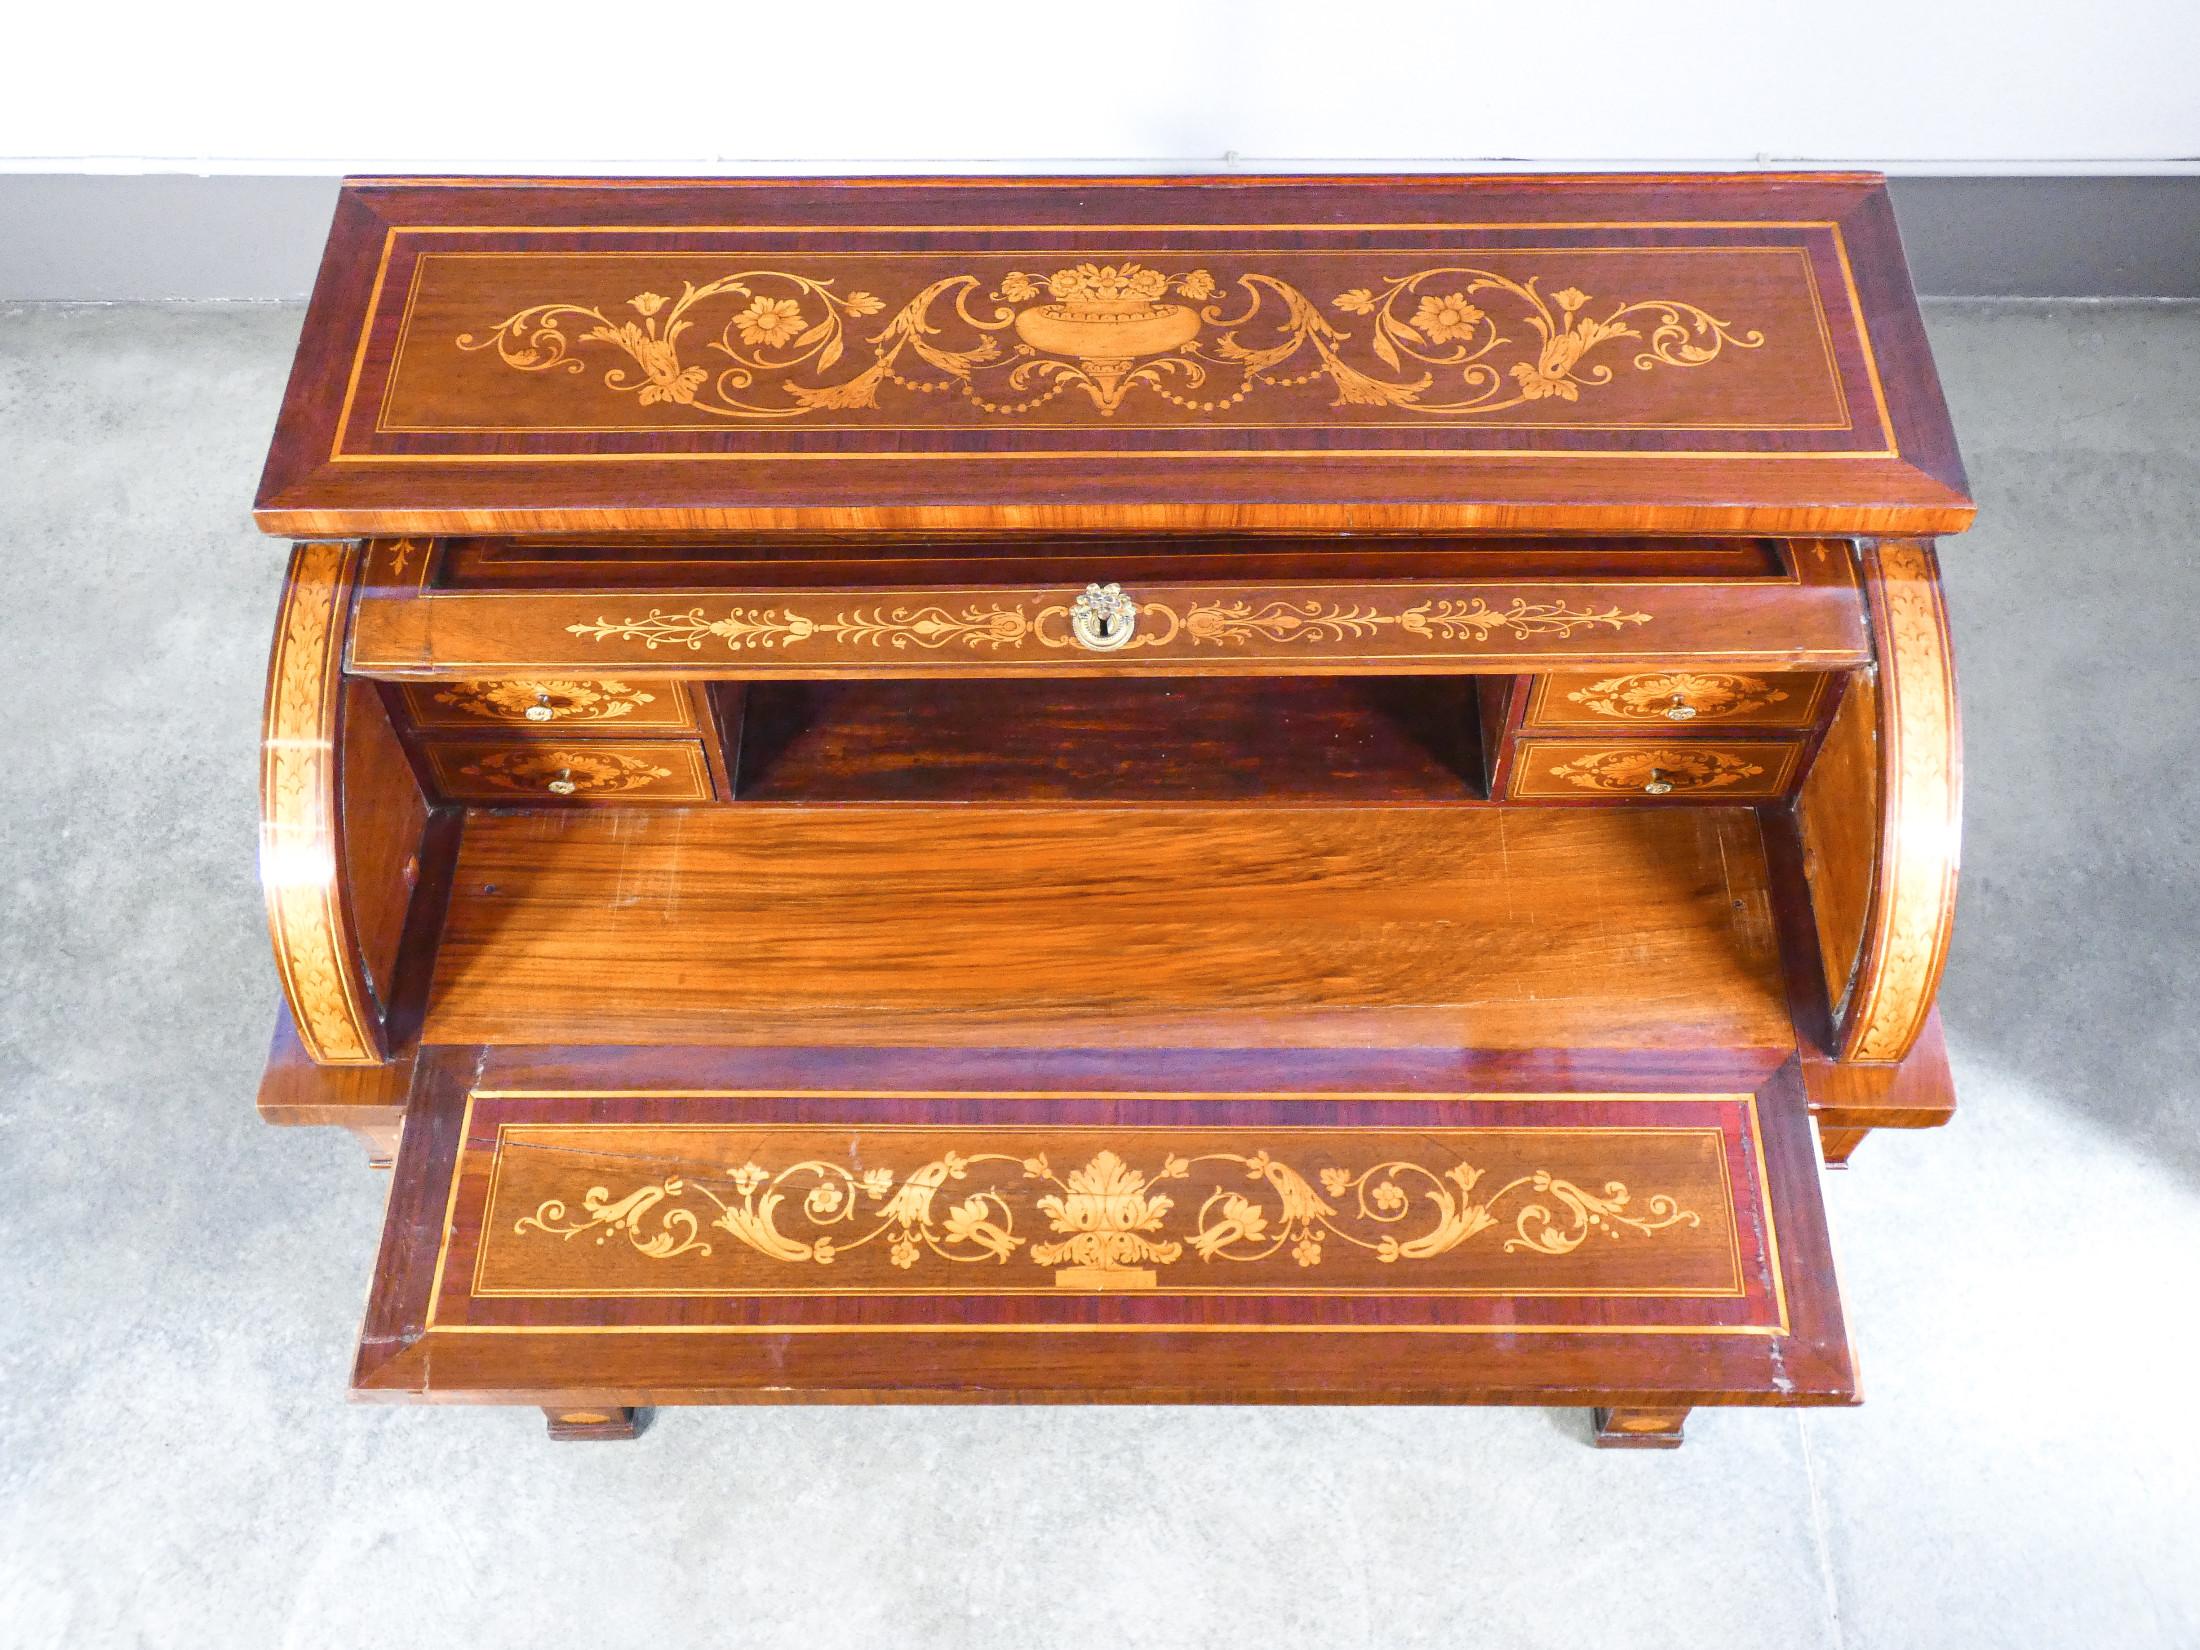 Empire Secretaire with Writing Desk, Richly Inlaid Wood. Italy Late 18th Century For Sale 2